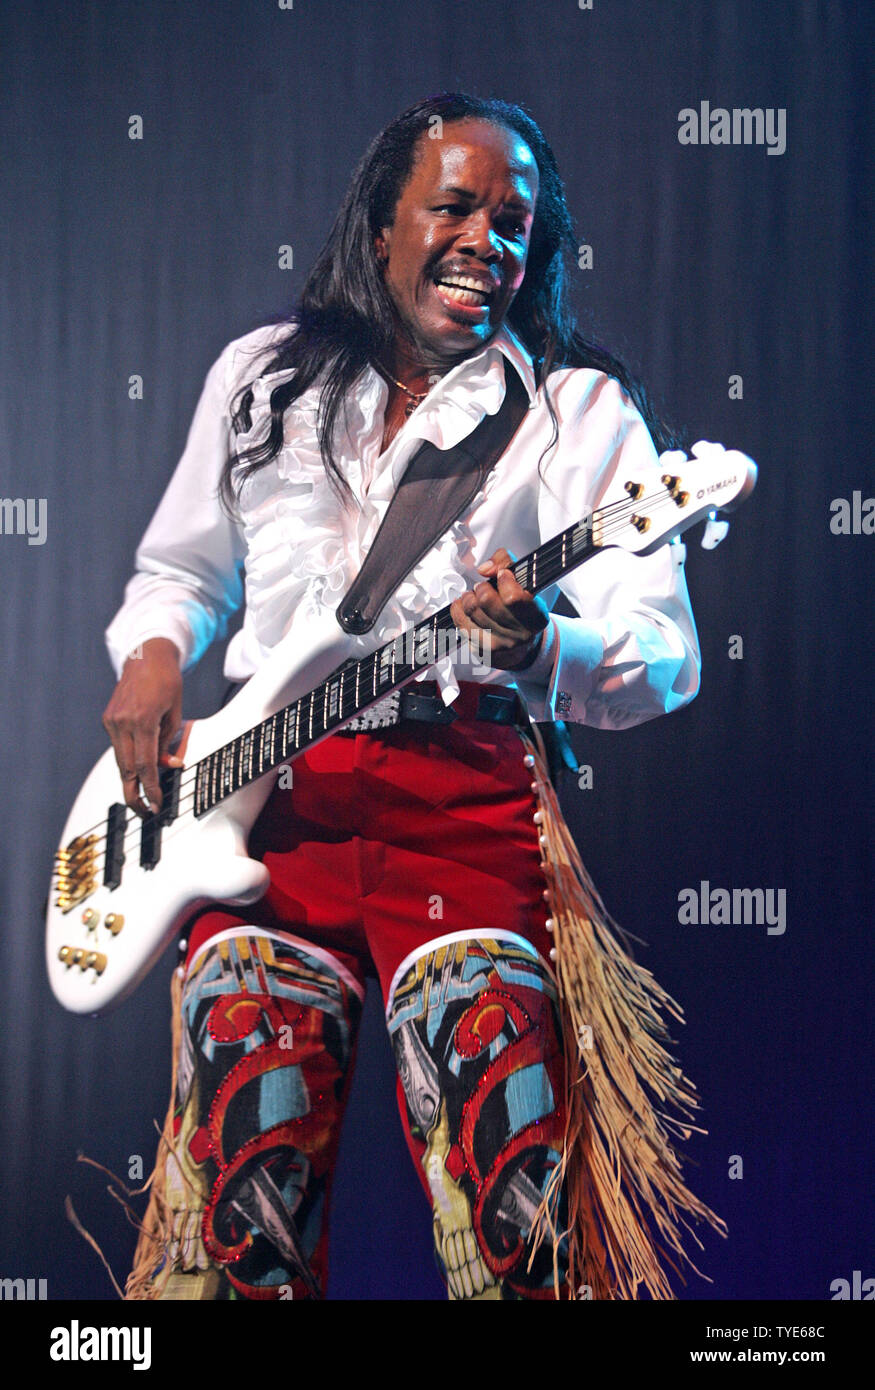 Verdine White High Resolution Stock Photography and Images - Alamy